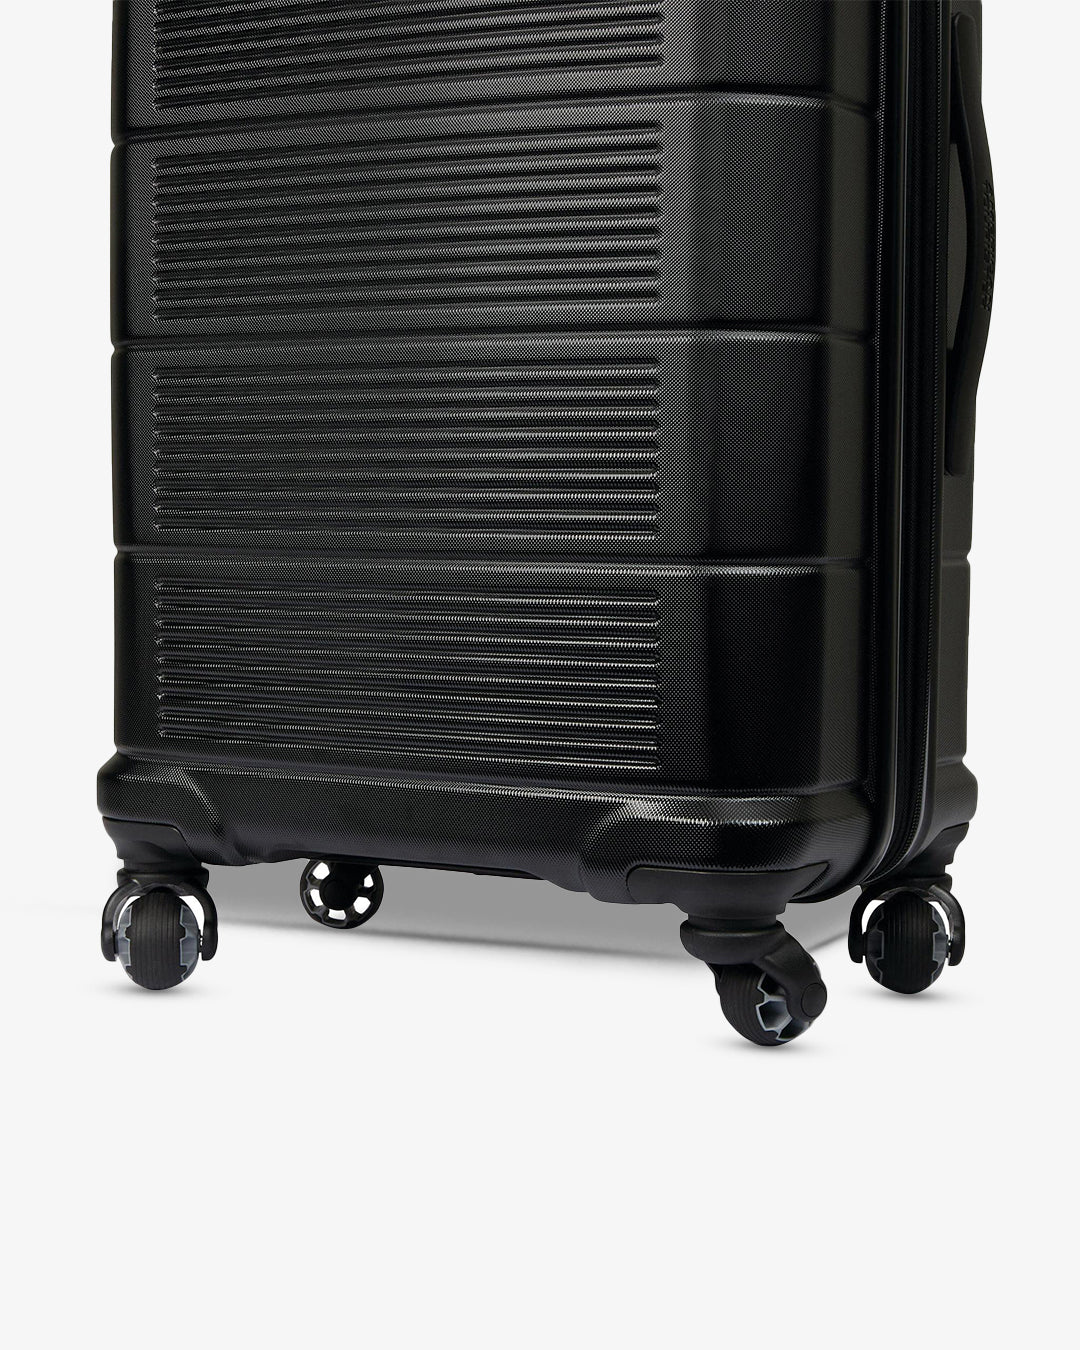 American Tourister Stratum 2.0 Spinner (LARGE)